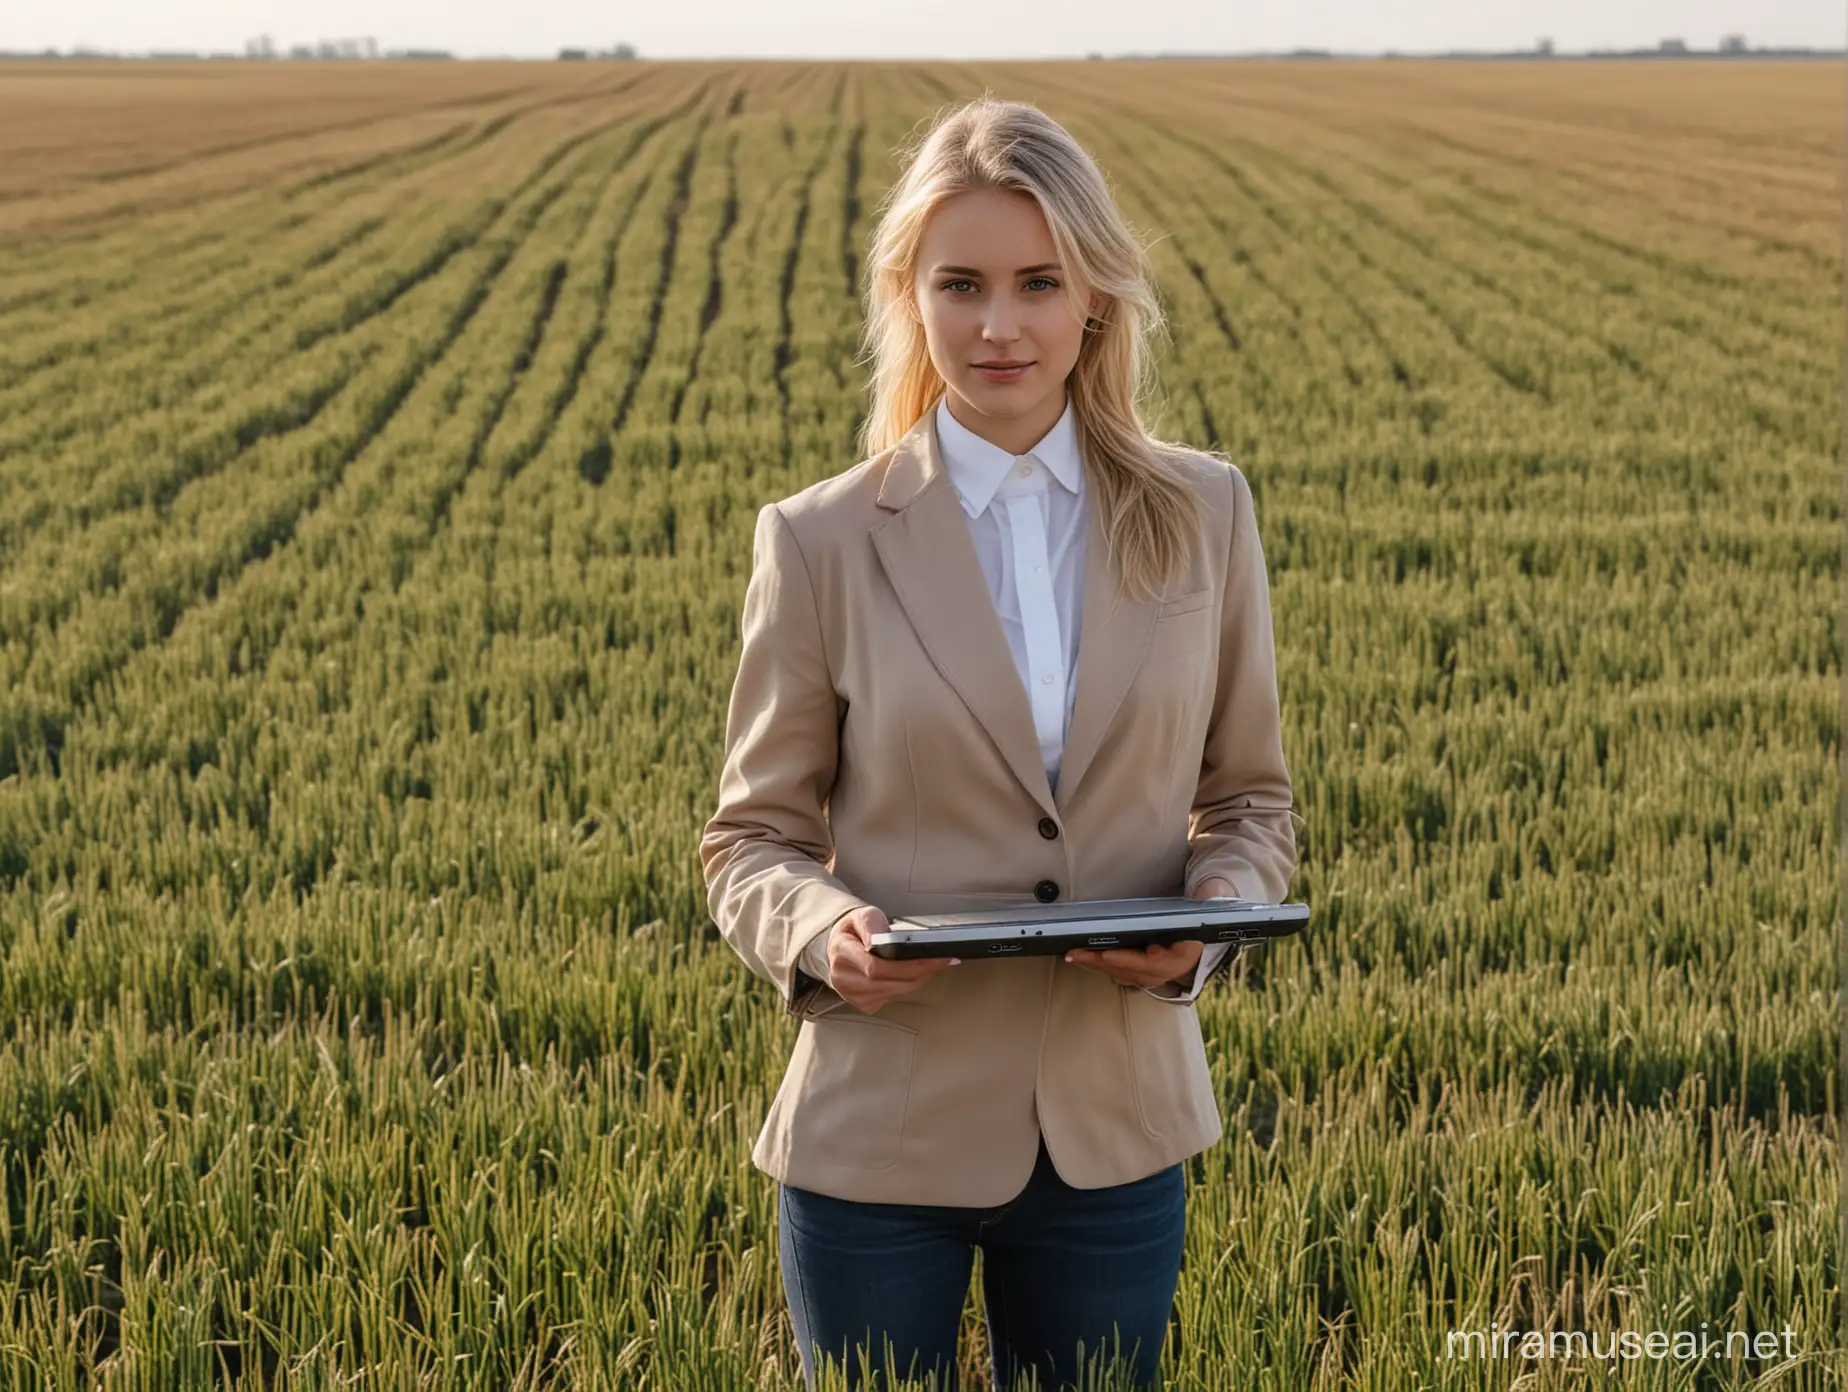 Blonde Consultant Evaluating Crops in European Grain Fields with Laptop